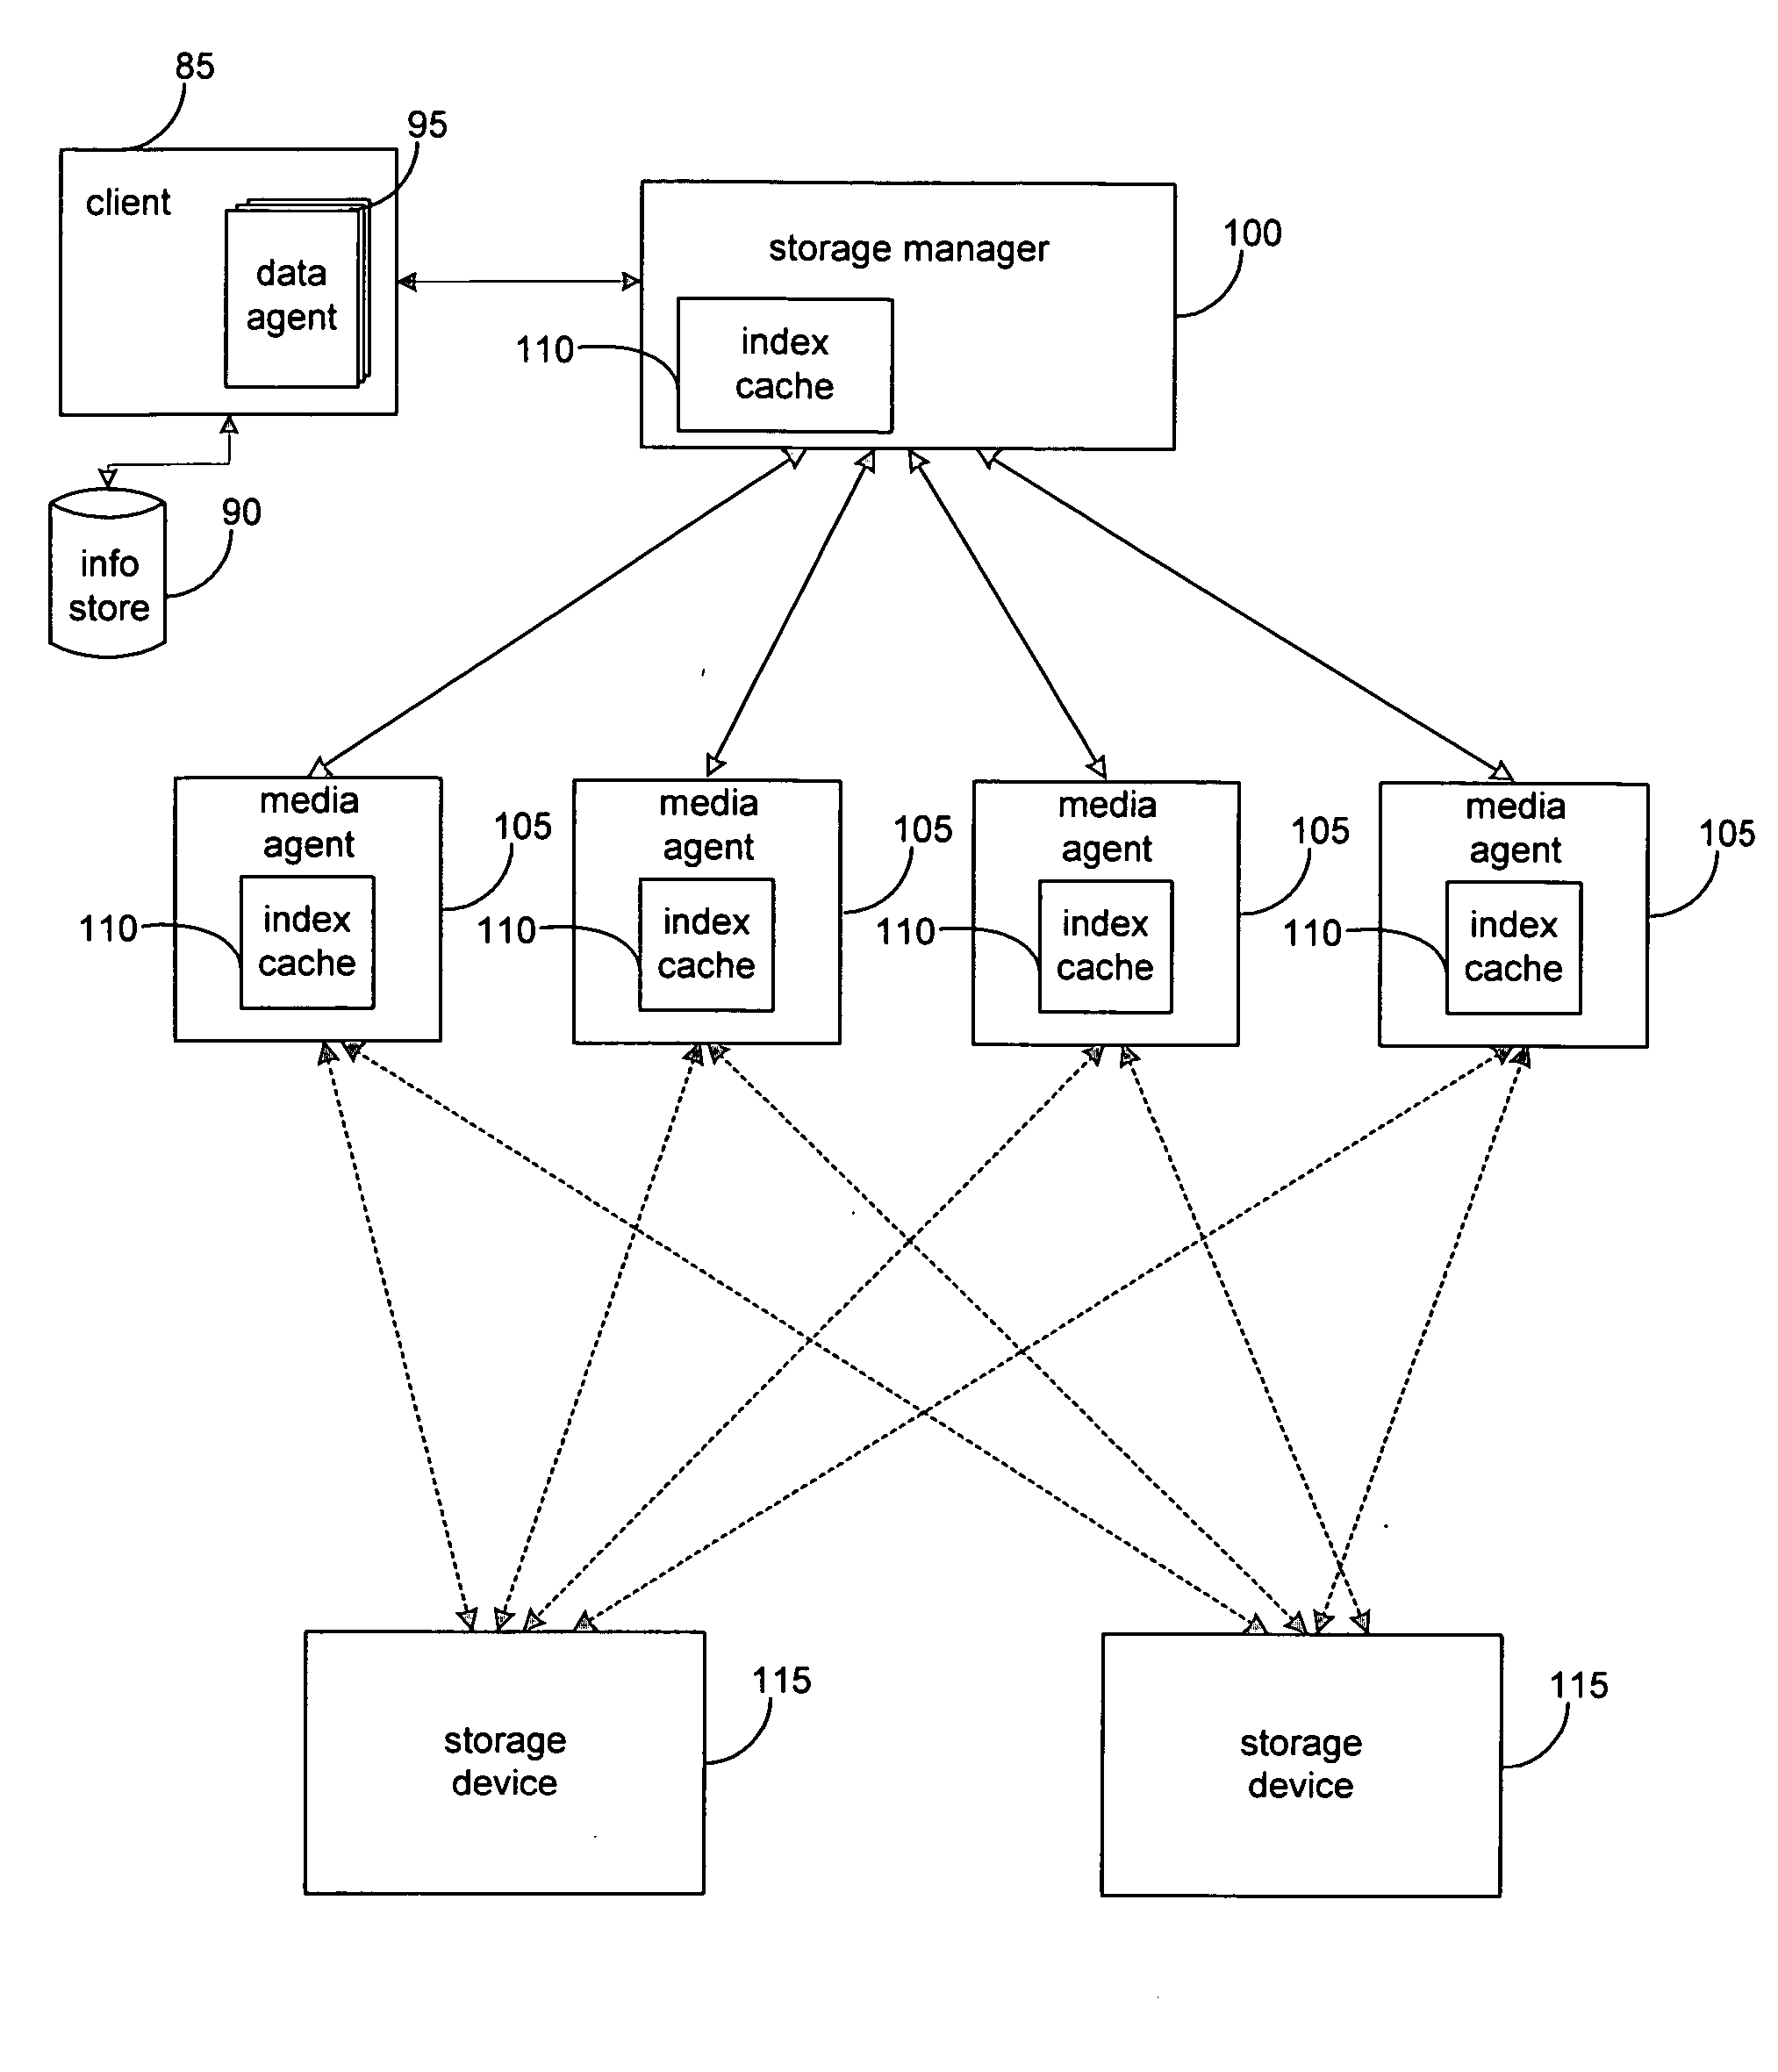 System and method for dynamically performing storage operations in a computer network